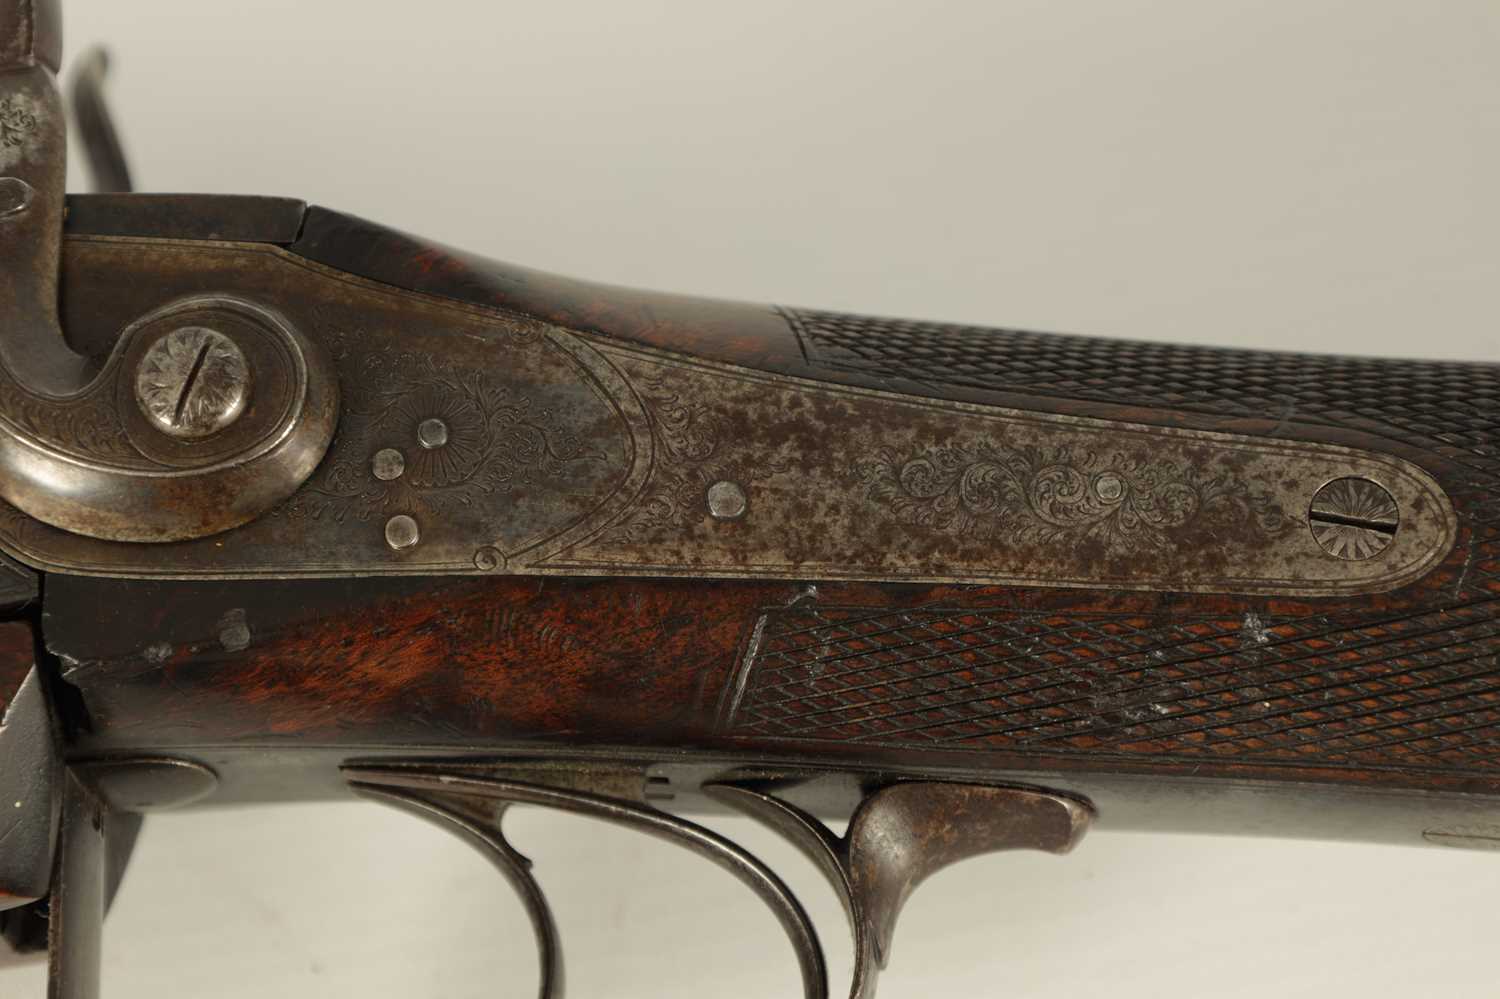 GILBY PATENT, A RARE 19TH CENTURY DOUBLE PERCUSSION BREACH LOADING RIFLE - Image 8 of 16